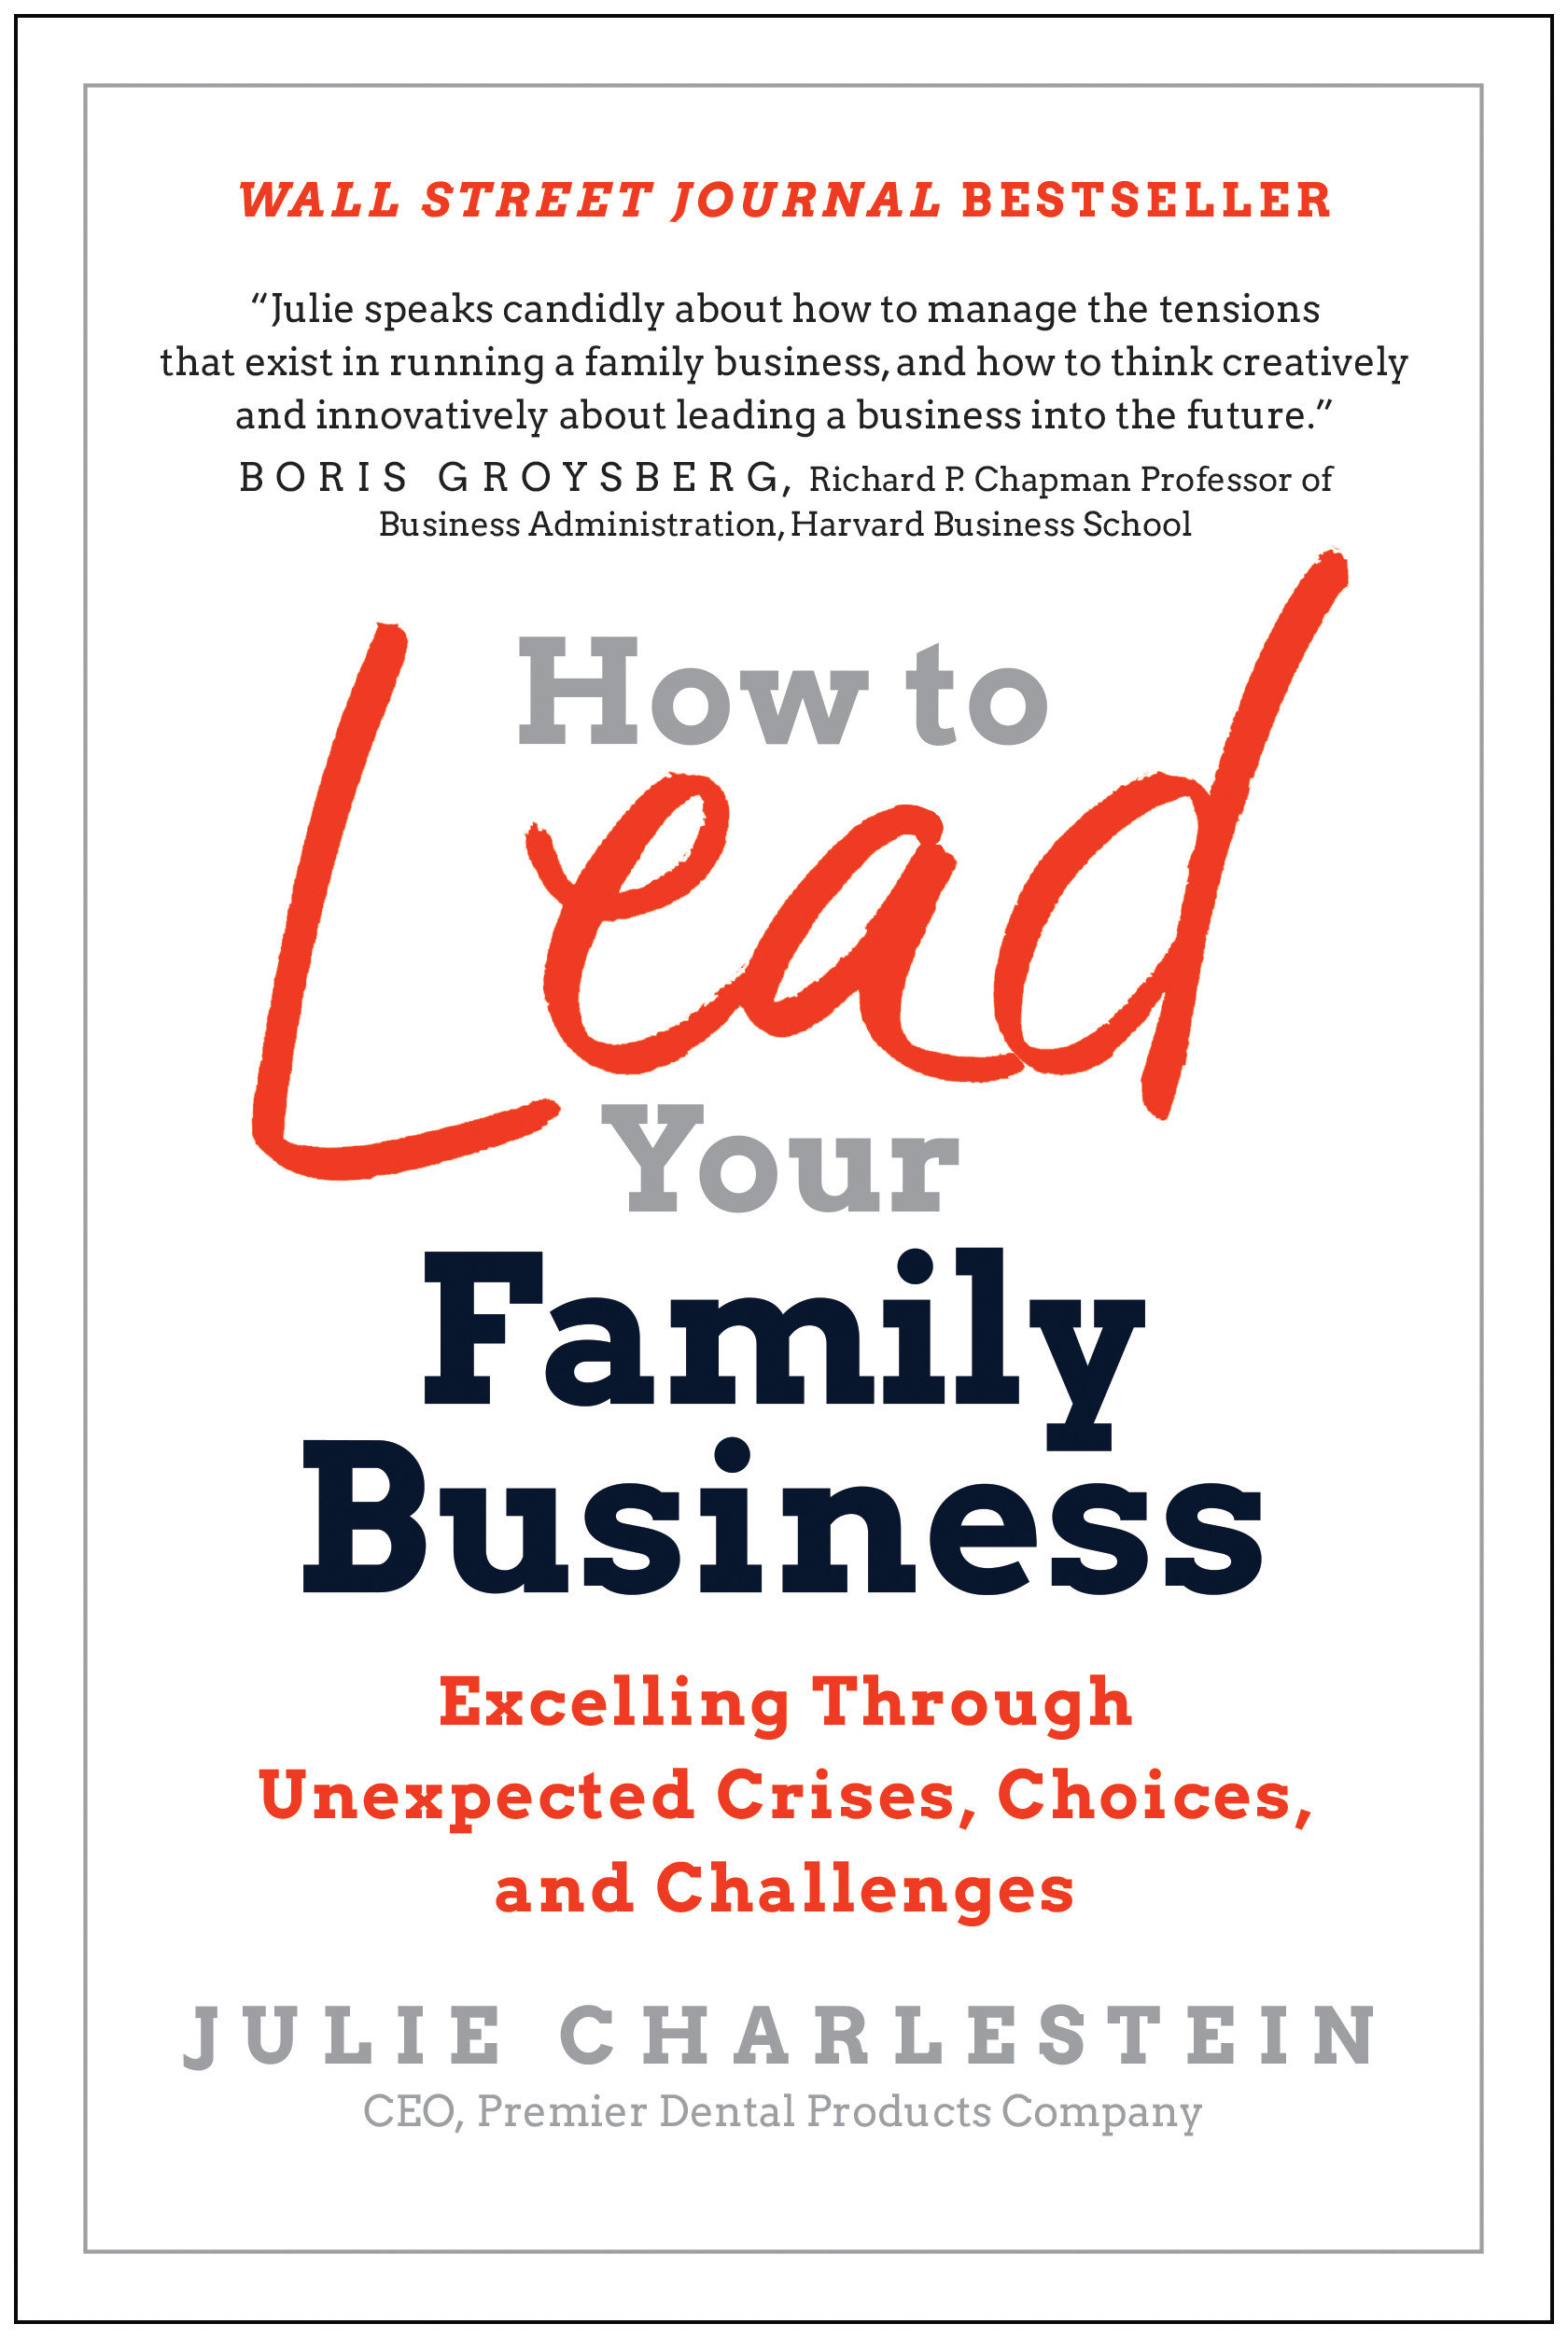 How To Lead Your Family Business (Hardcover Book)